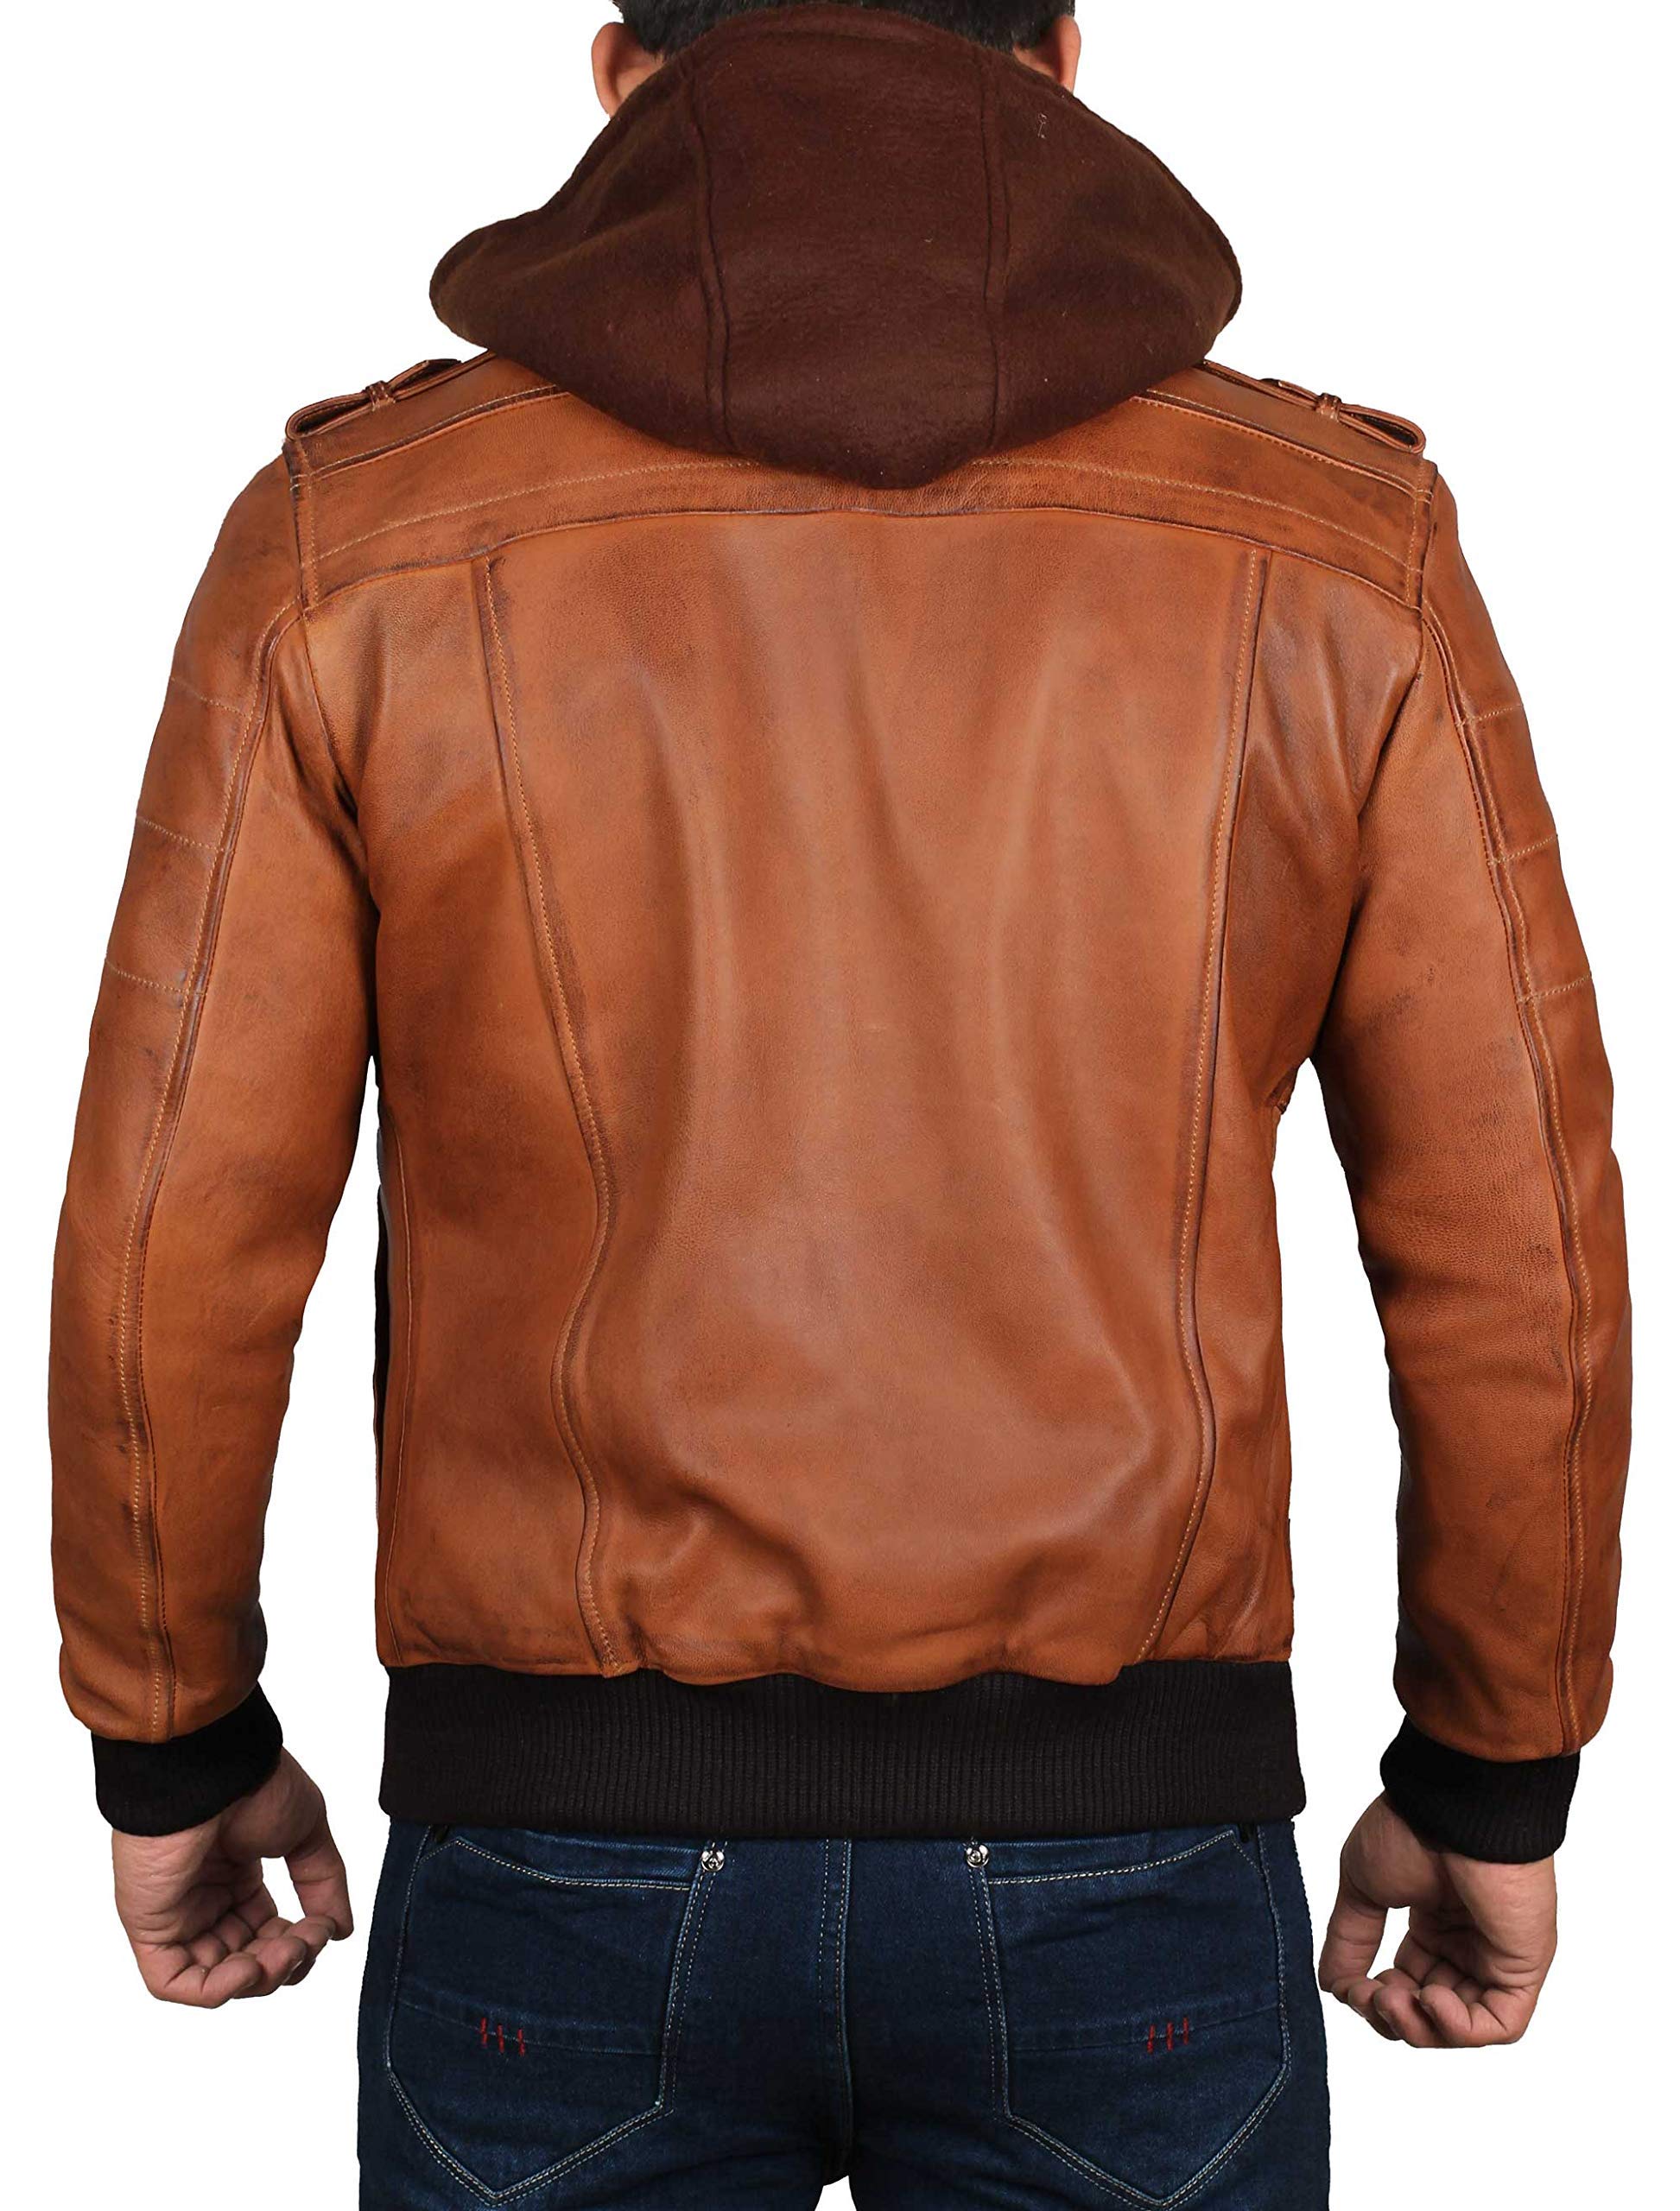 Blingsoul Leather Bomber Jackets For Men - Real Lambskin Mens Leather Jacket With Hood